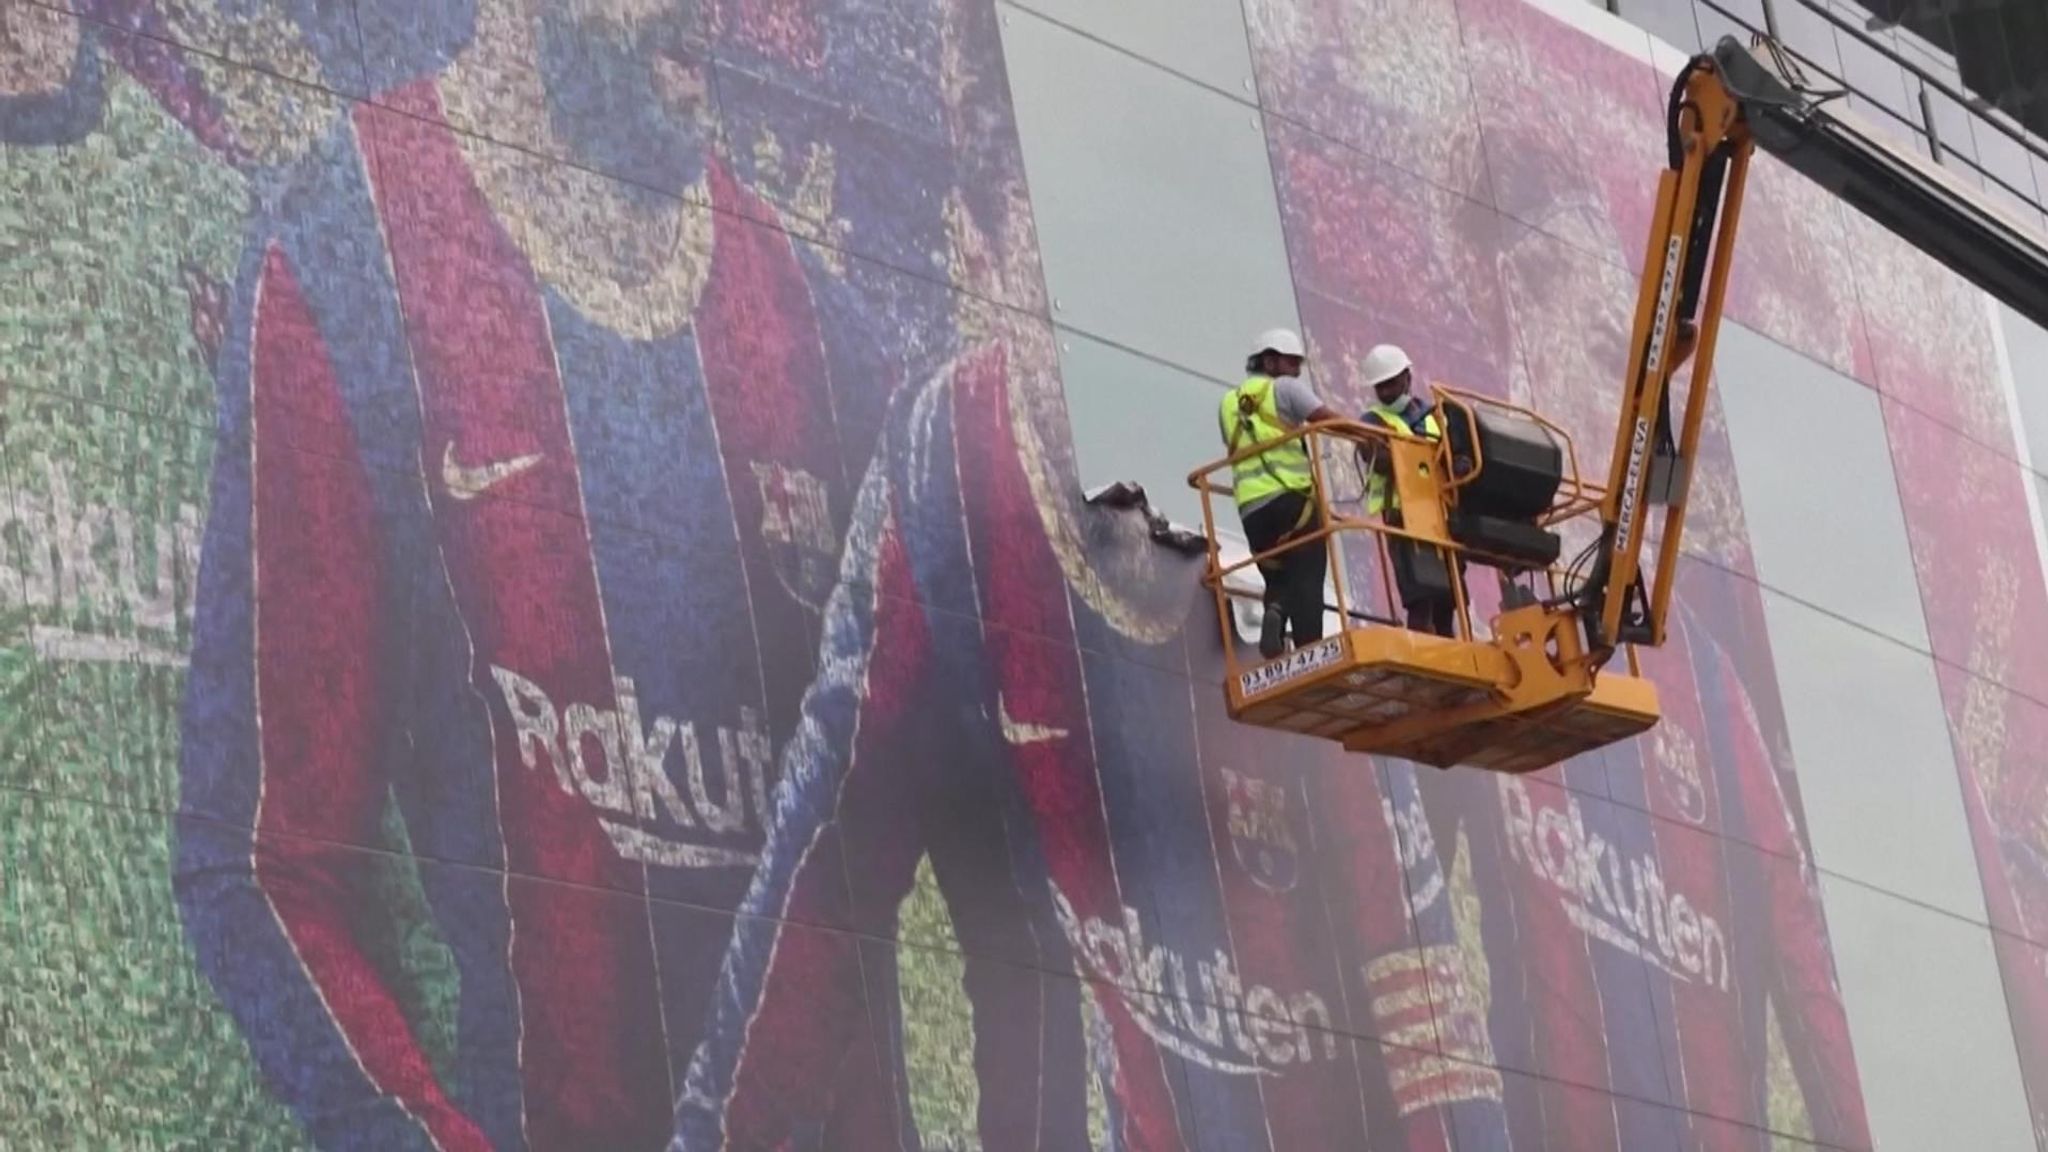 PHOTOS: Messi’s Image Pulled Down From Camp Nou  %Post Title